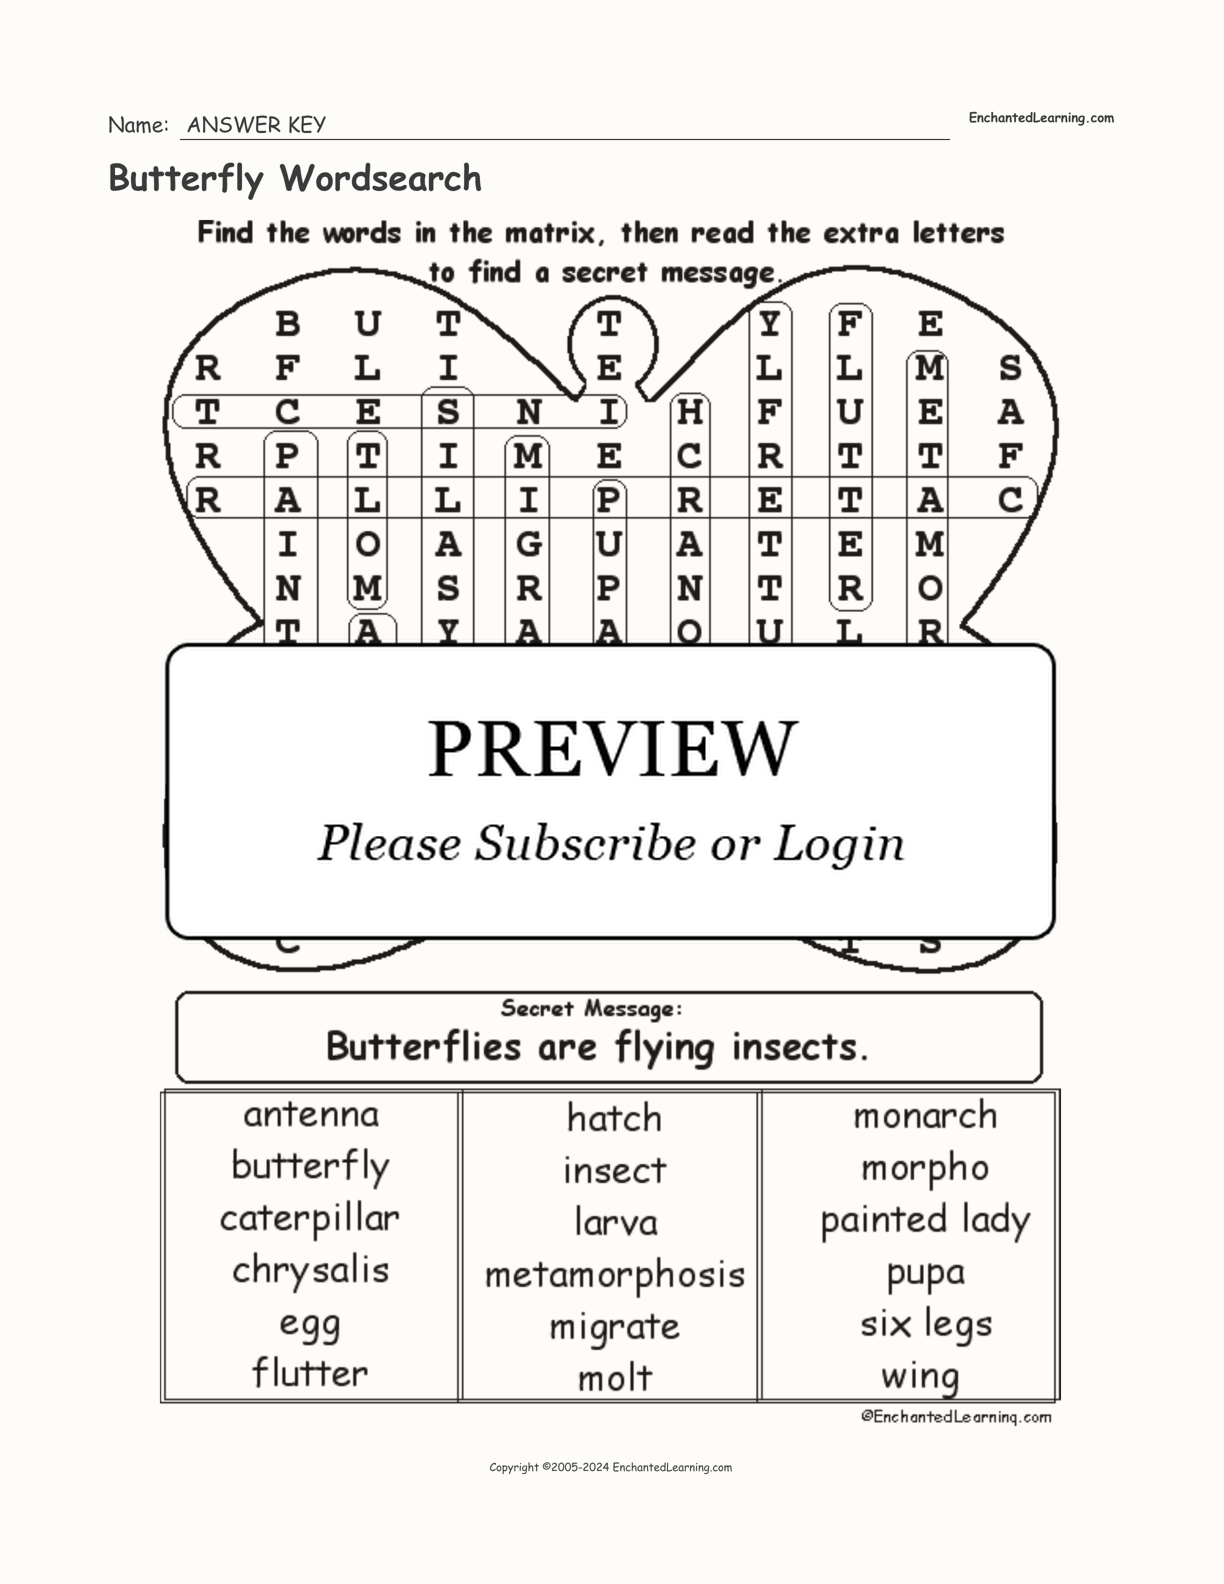 Butterfly Wordsearch interactive worksheet page 2